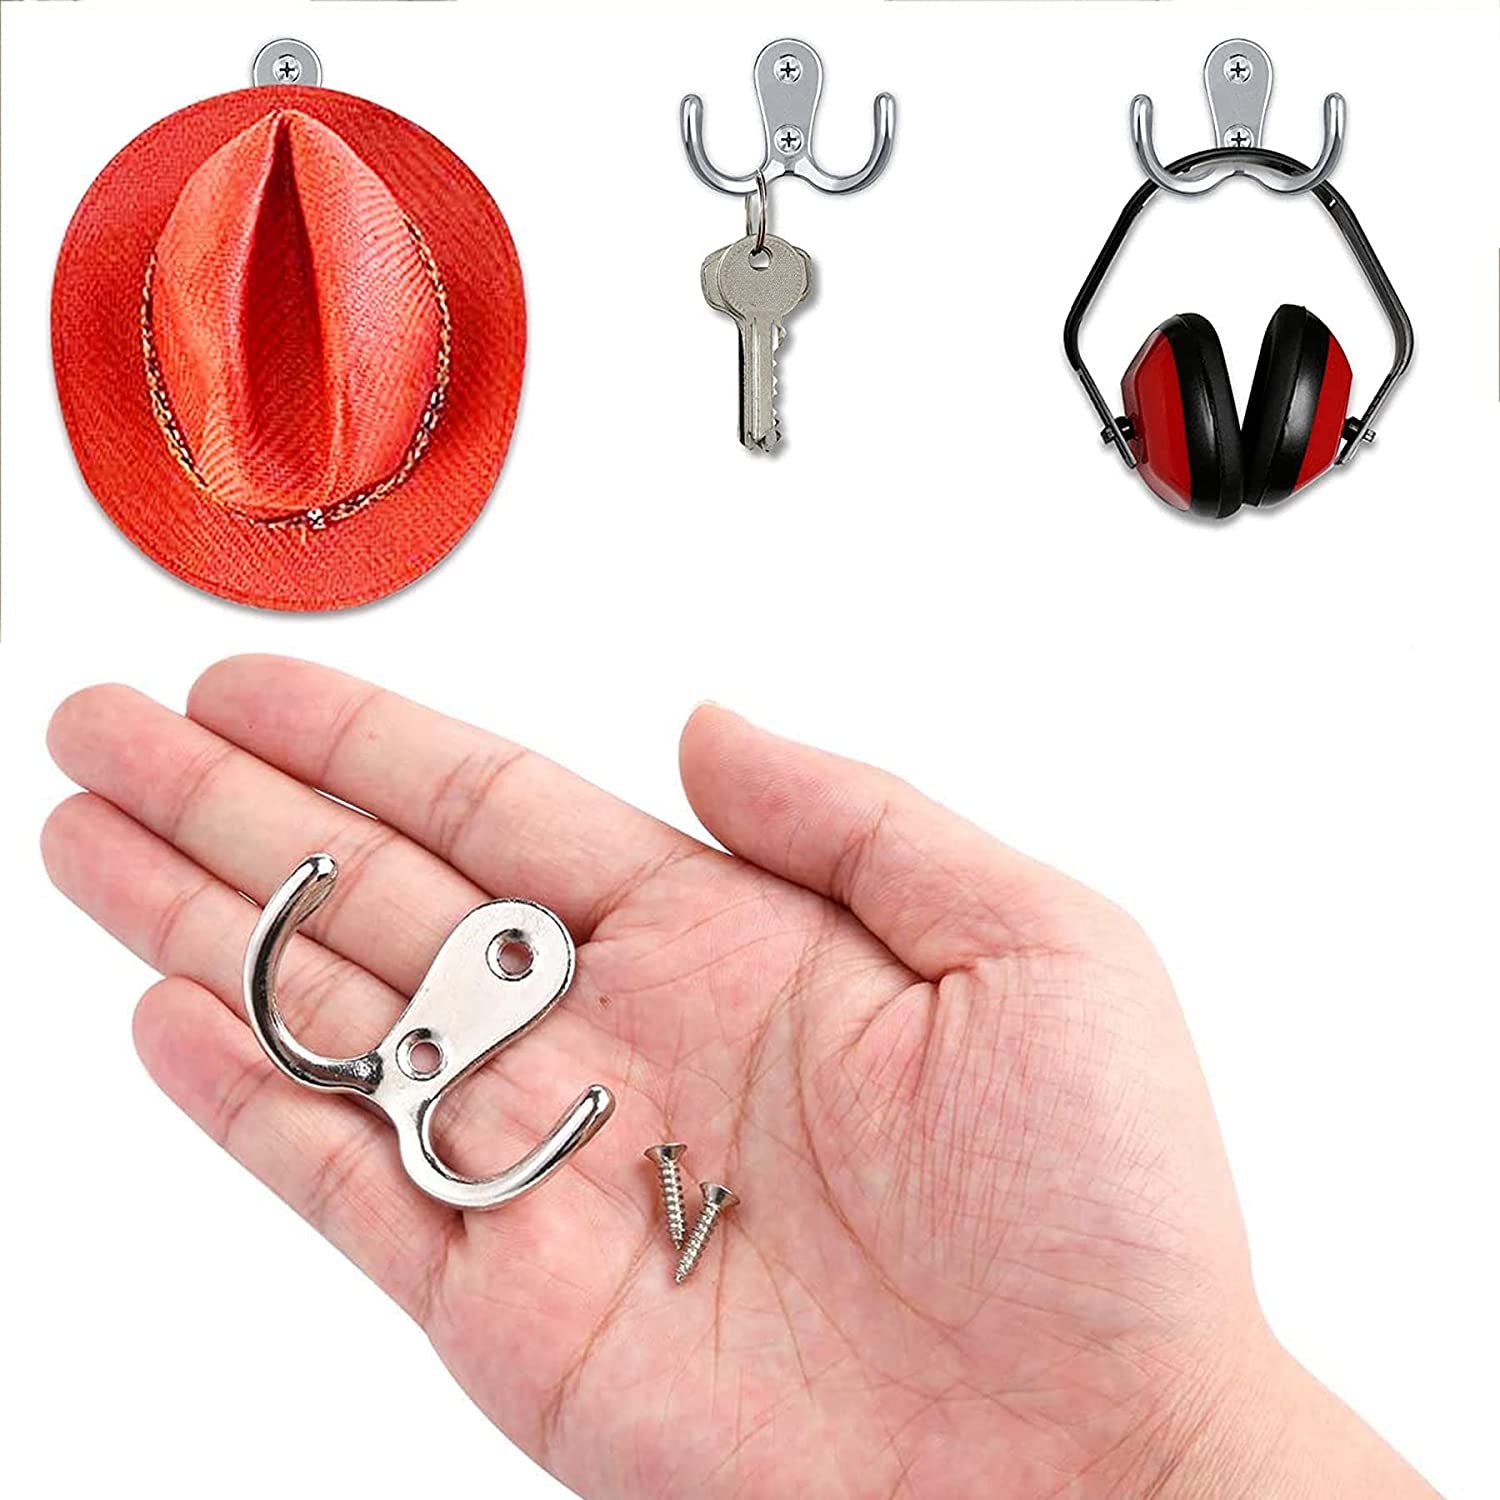 4pcs Hat Holder Sticky Wall Mount Hook For Baseball Cap Casual Hat